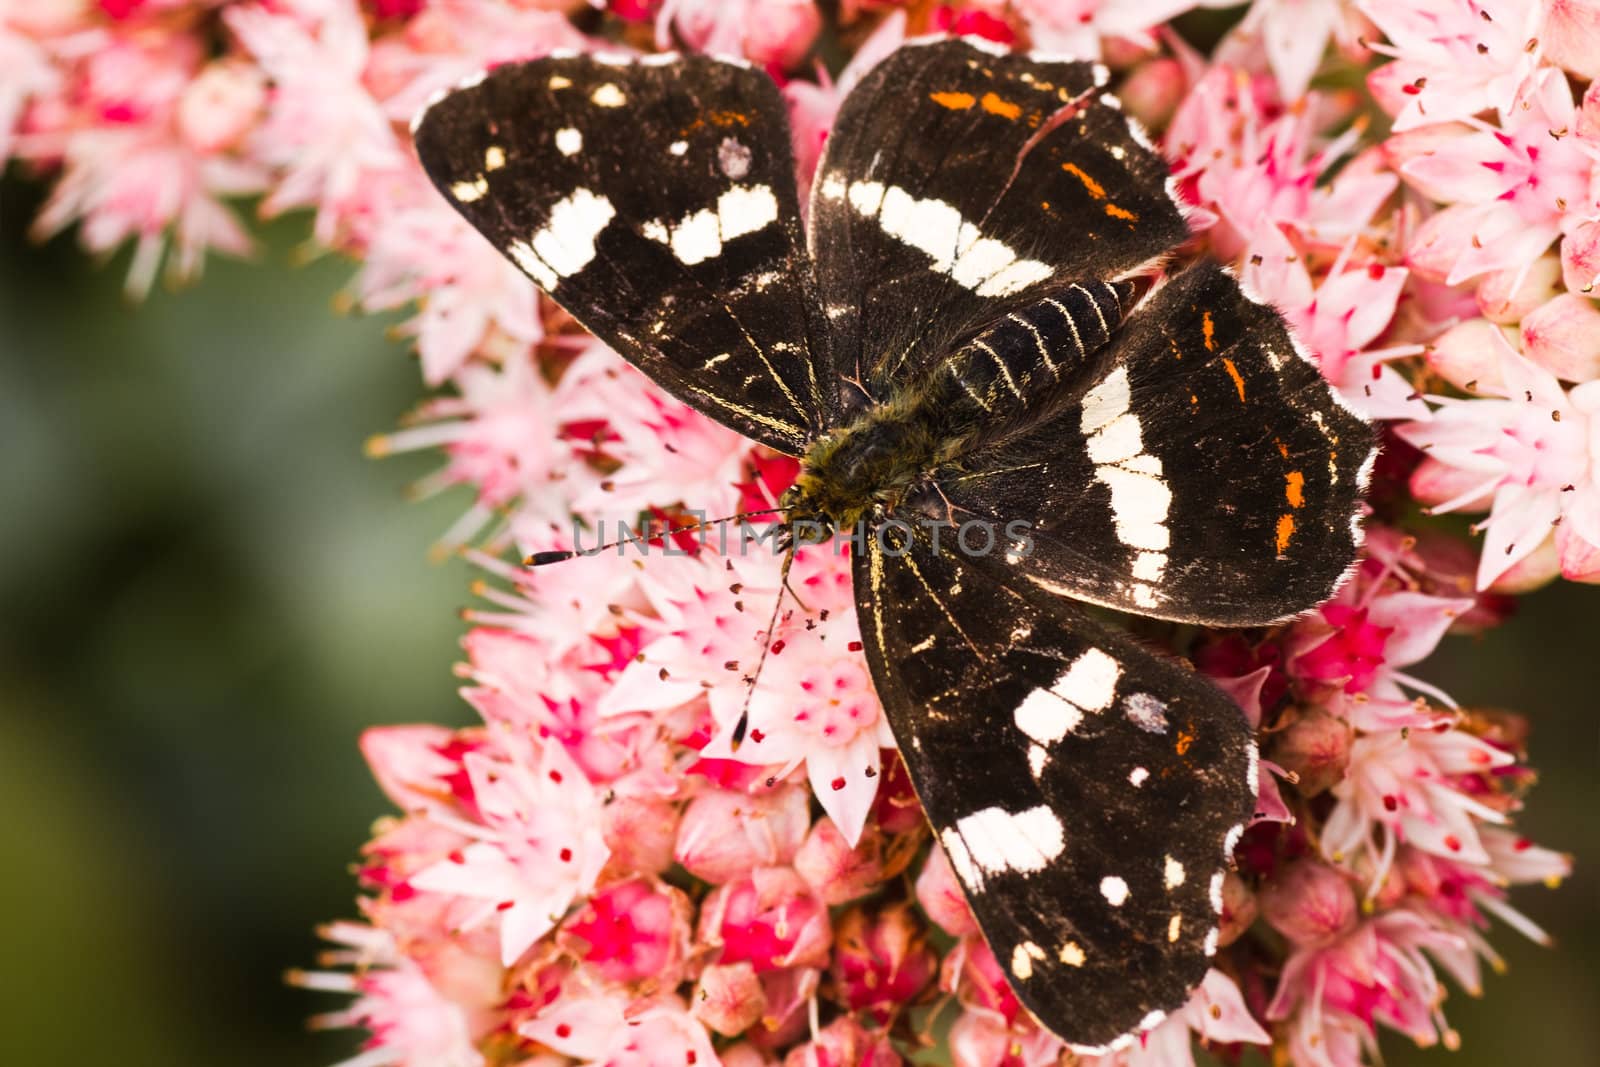 Dark colored summer generation of Map butterfly or Araschnia levana on Sedum flowers in autumn